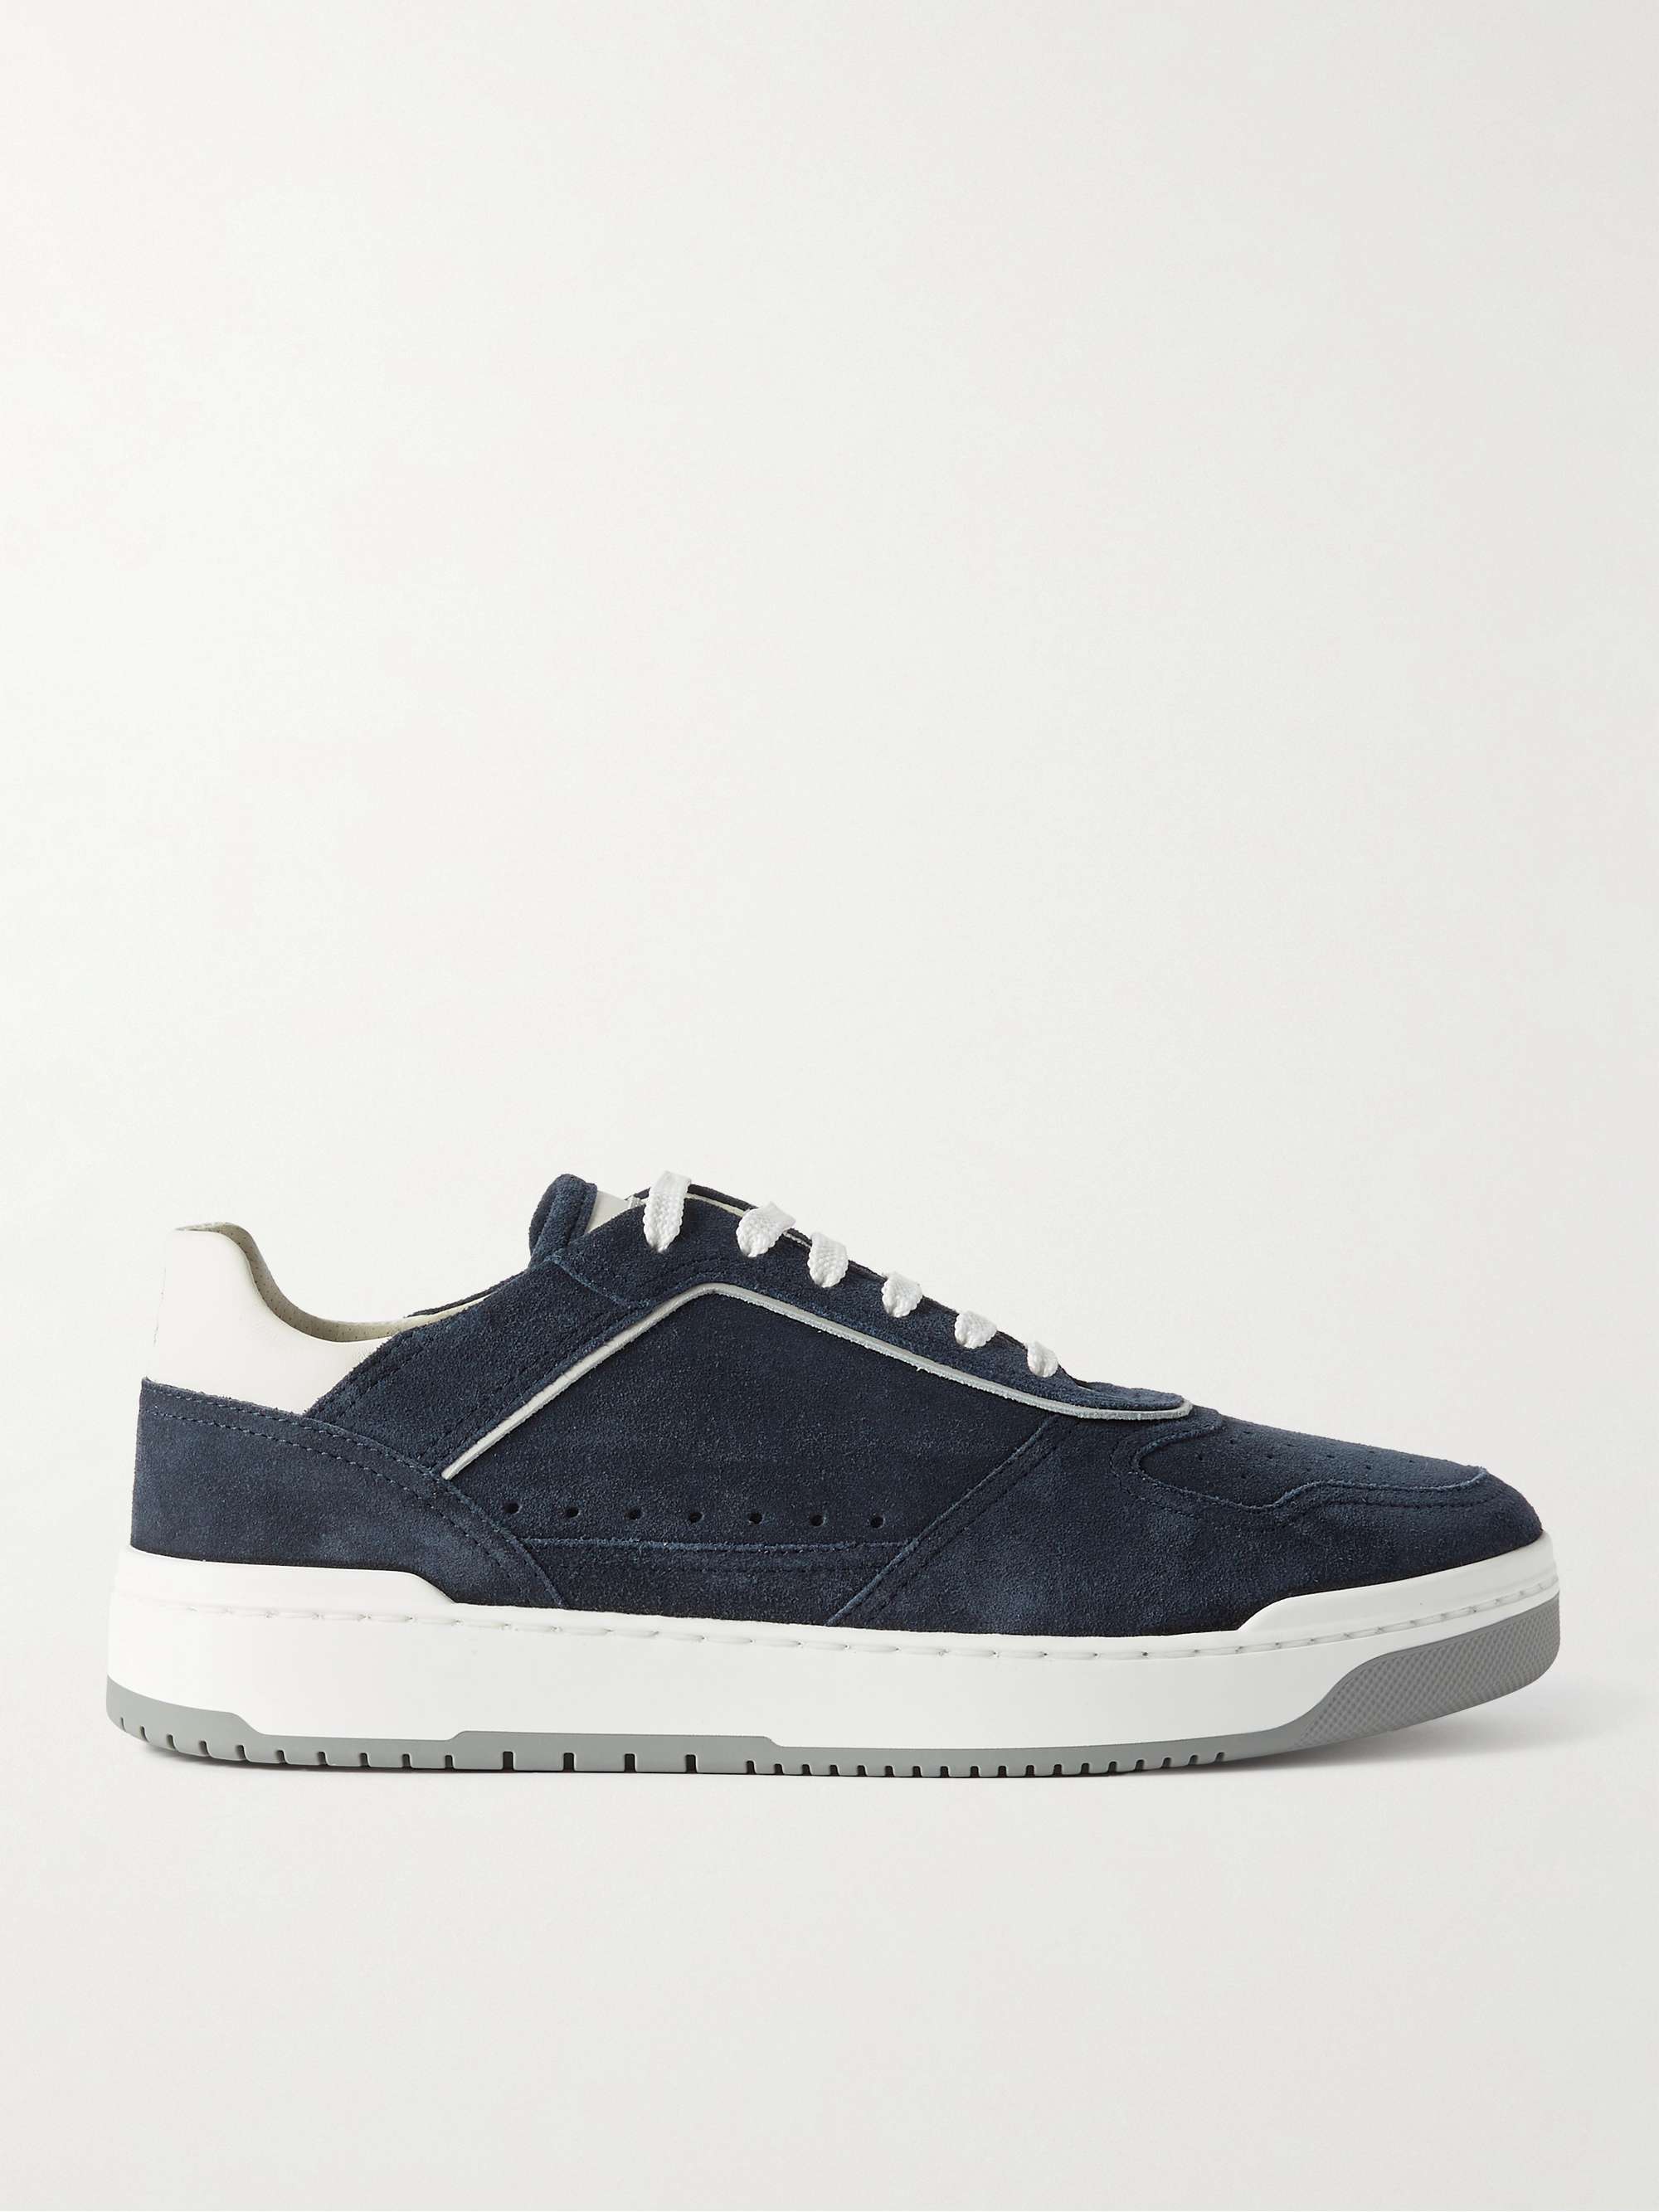 BRUNELLO CUCINELLI Leather-Trimmed Suede Sneakers for Men | MR PORTER